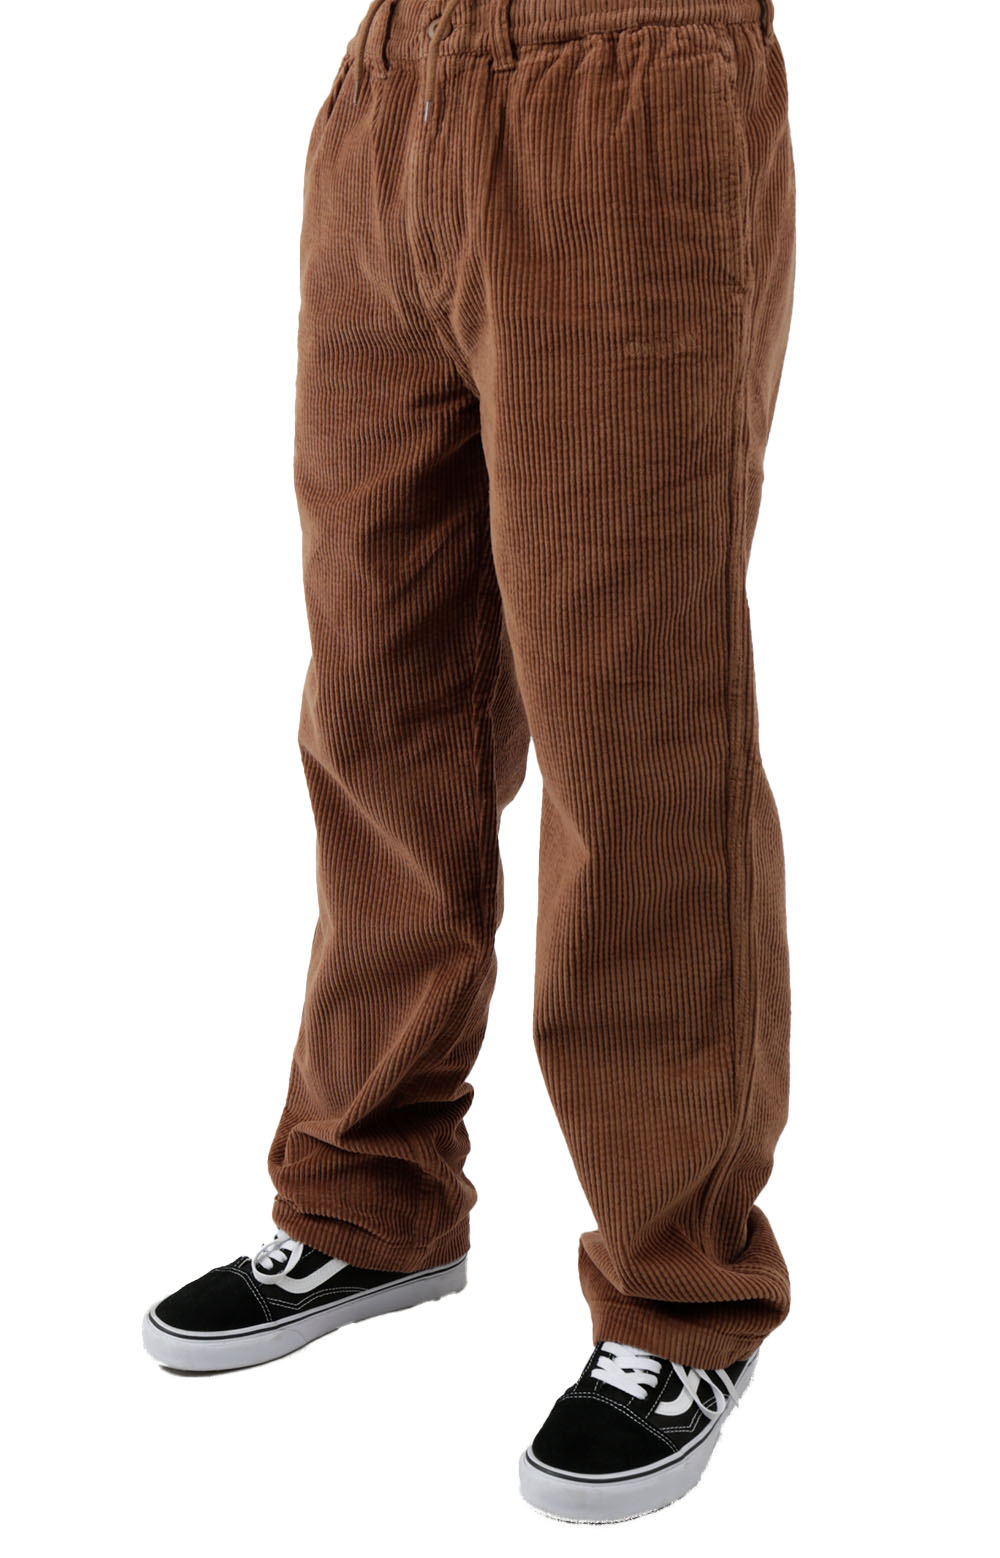 Wide Wale Cordurouy Chill Pants - Brown